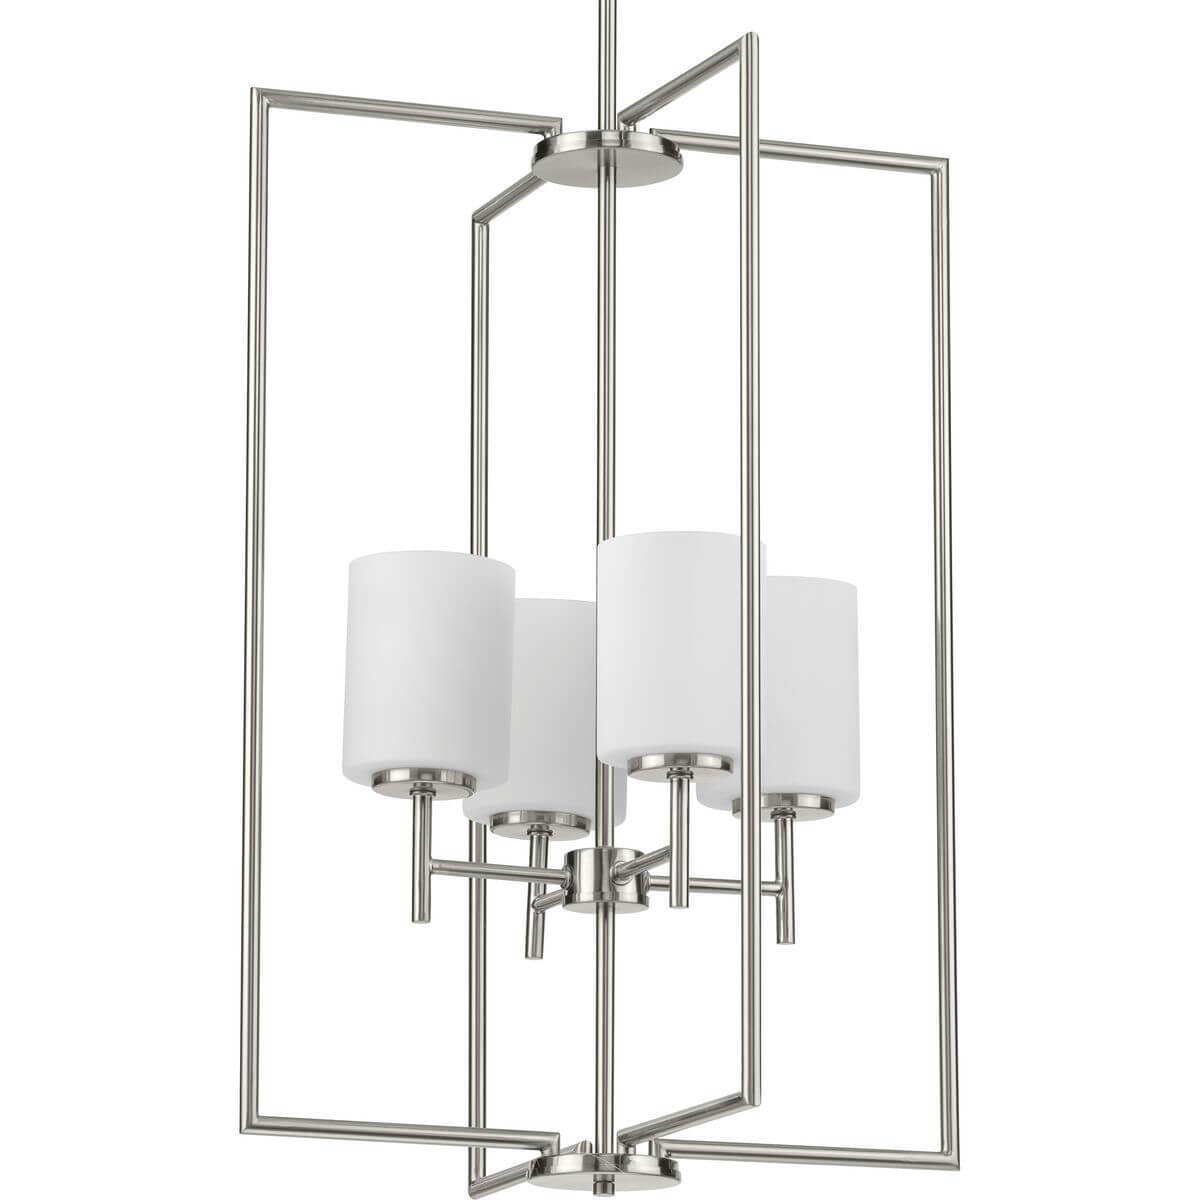 Progress Lighting Replay 4 Light 18 inch Pendant in Brushed Nickel with Etched White Glass P500206-009